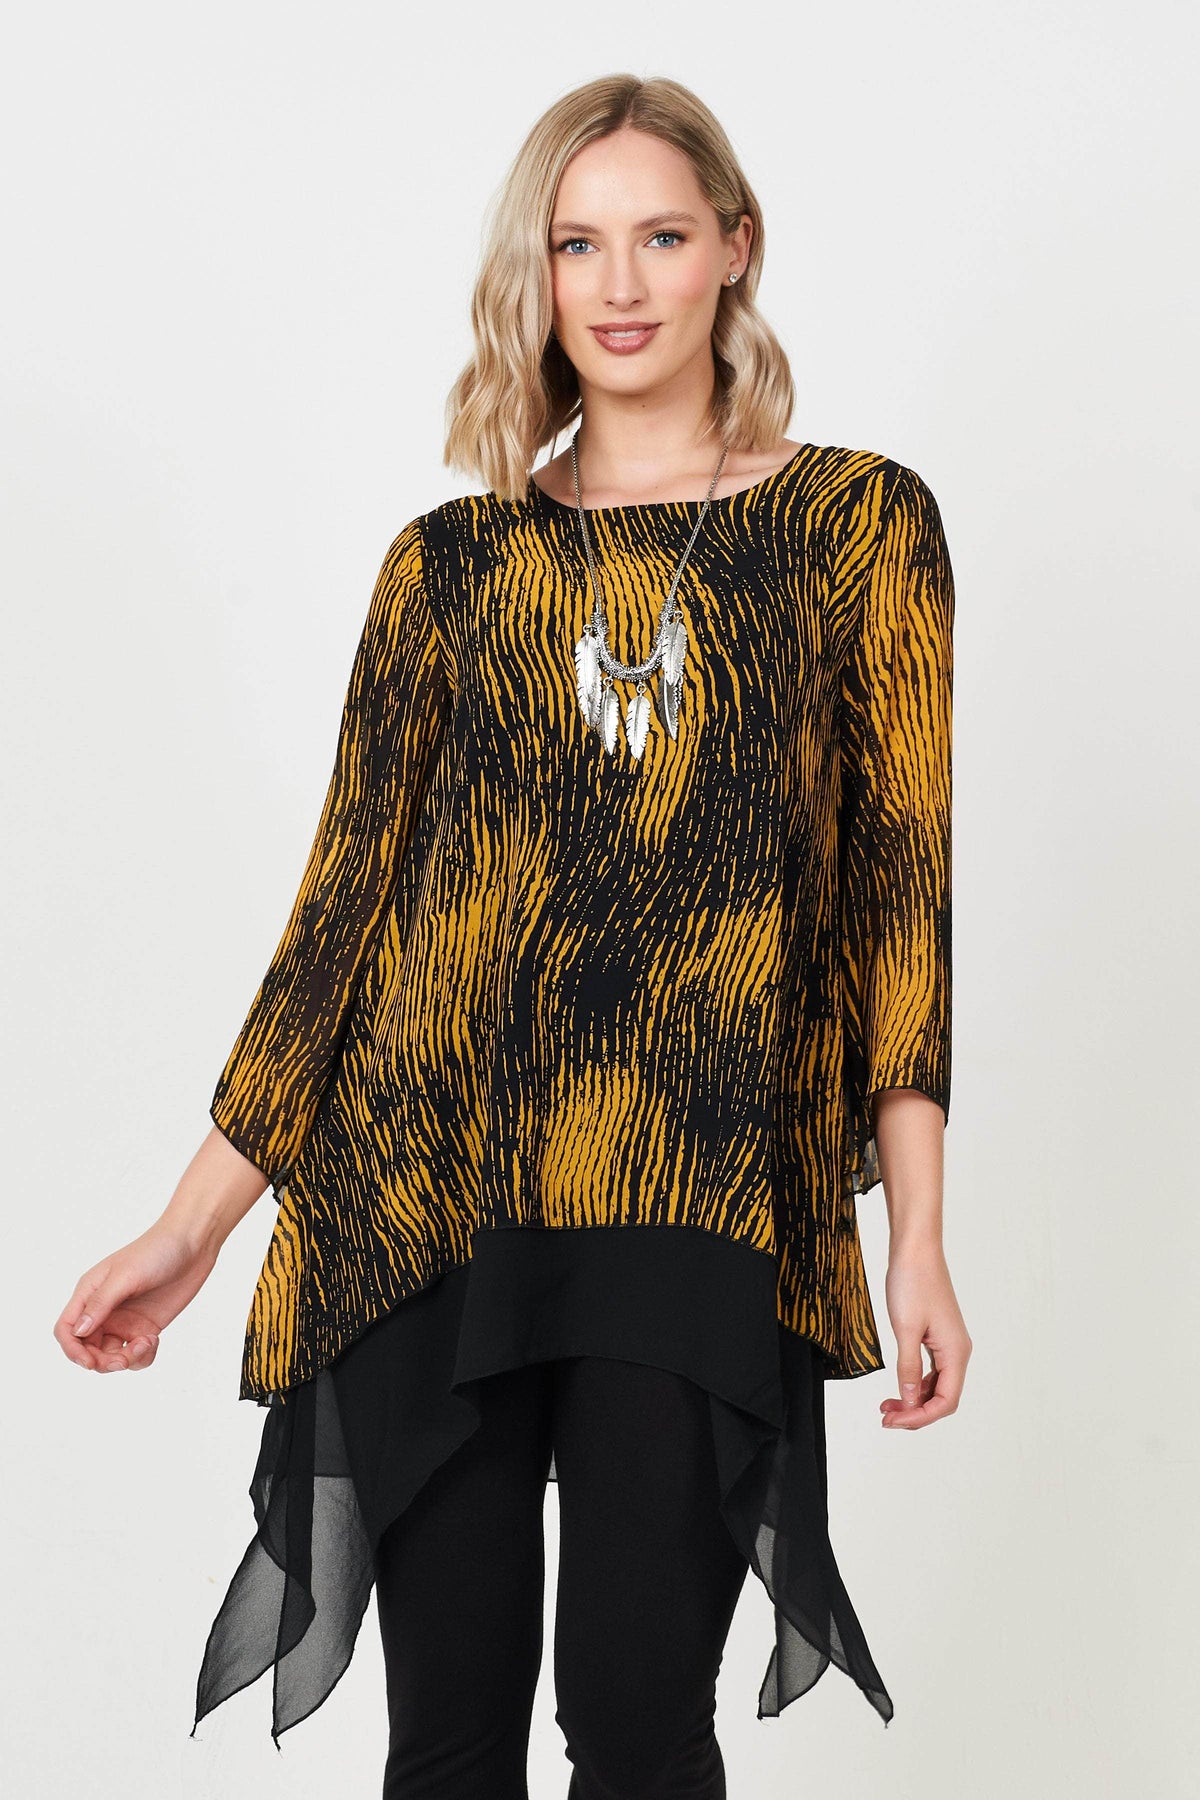 2G Top Mustard / UK: 10 - EU: 36 - US: XS Flared Double Layer Tunic Top with Necklace